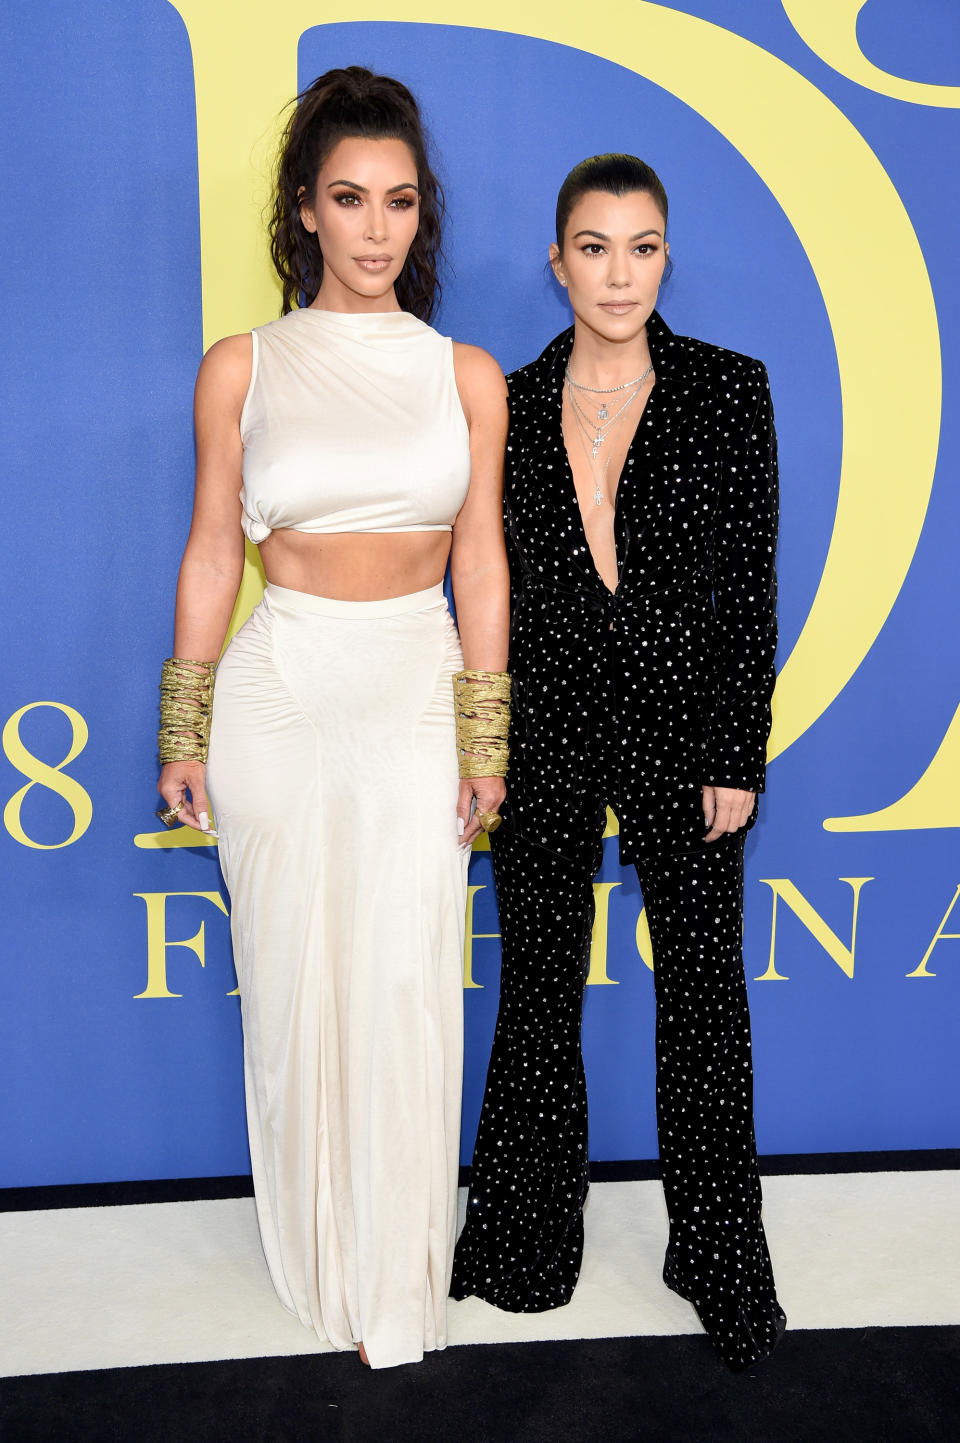 NEW YORK, NY - JUNE 04:  Kim Kardashian West and Kourtney Kardashian attend the 2018 CFDA Fashion Awards at Brooklyn Museum on June 4, 2018 in New York City.  (Photo by Dimitrios Kambouris/Getty Images)